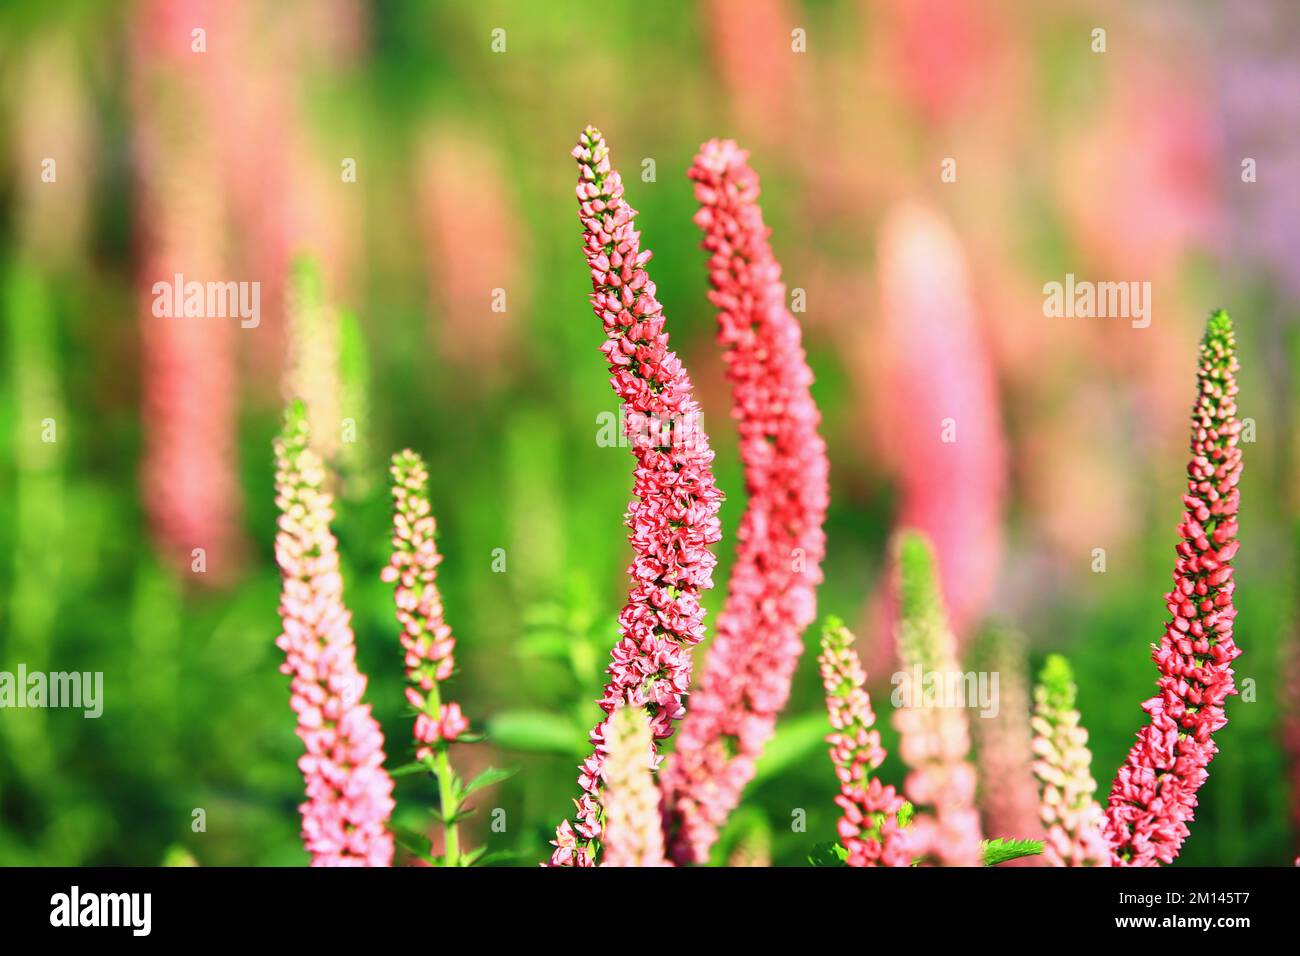 Polygonum Affine,Persicaria Affinis,close-up of small pink with red flowers blooming on the one stem in the garden Stock Photo